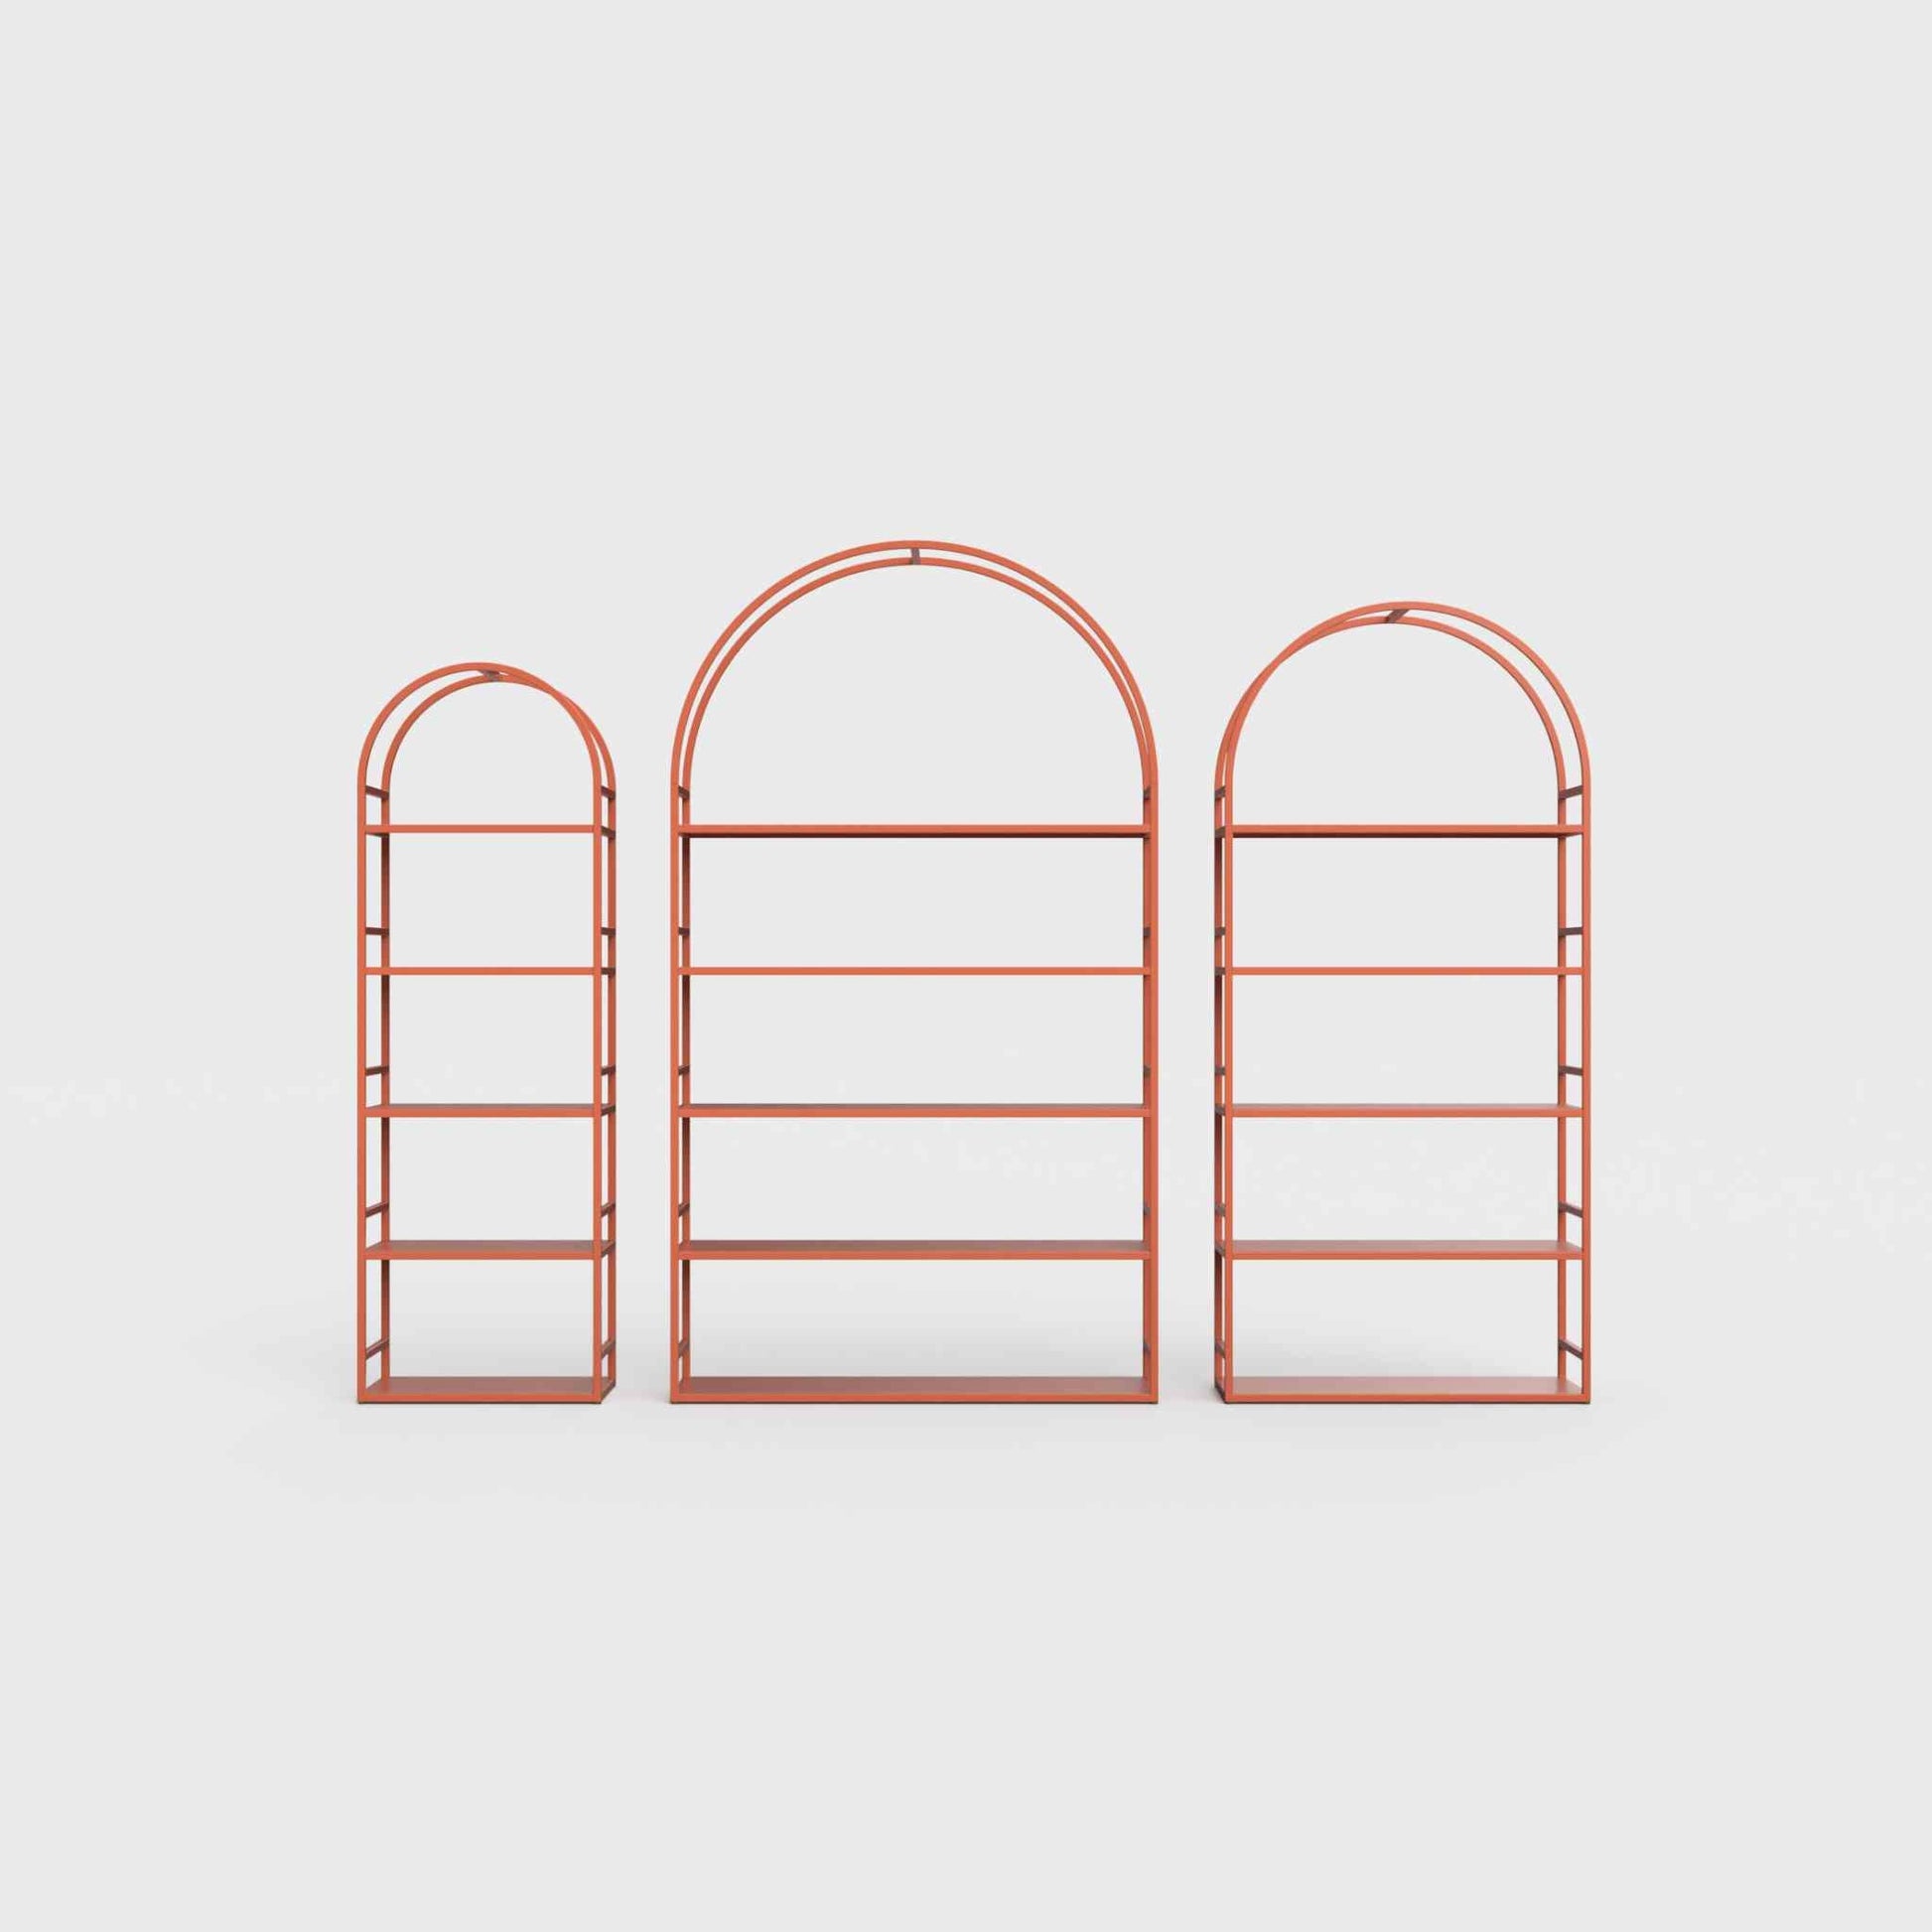 Arched bookcase Arkada, available in Switzerland through ÉTAUDORÉ, made from highest quality powdered coated steel in brick orange color